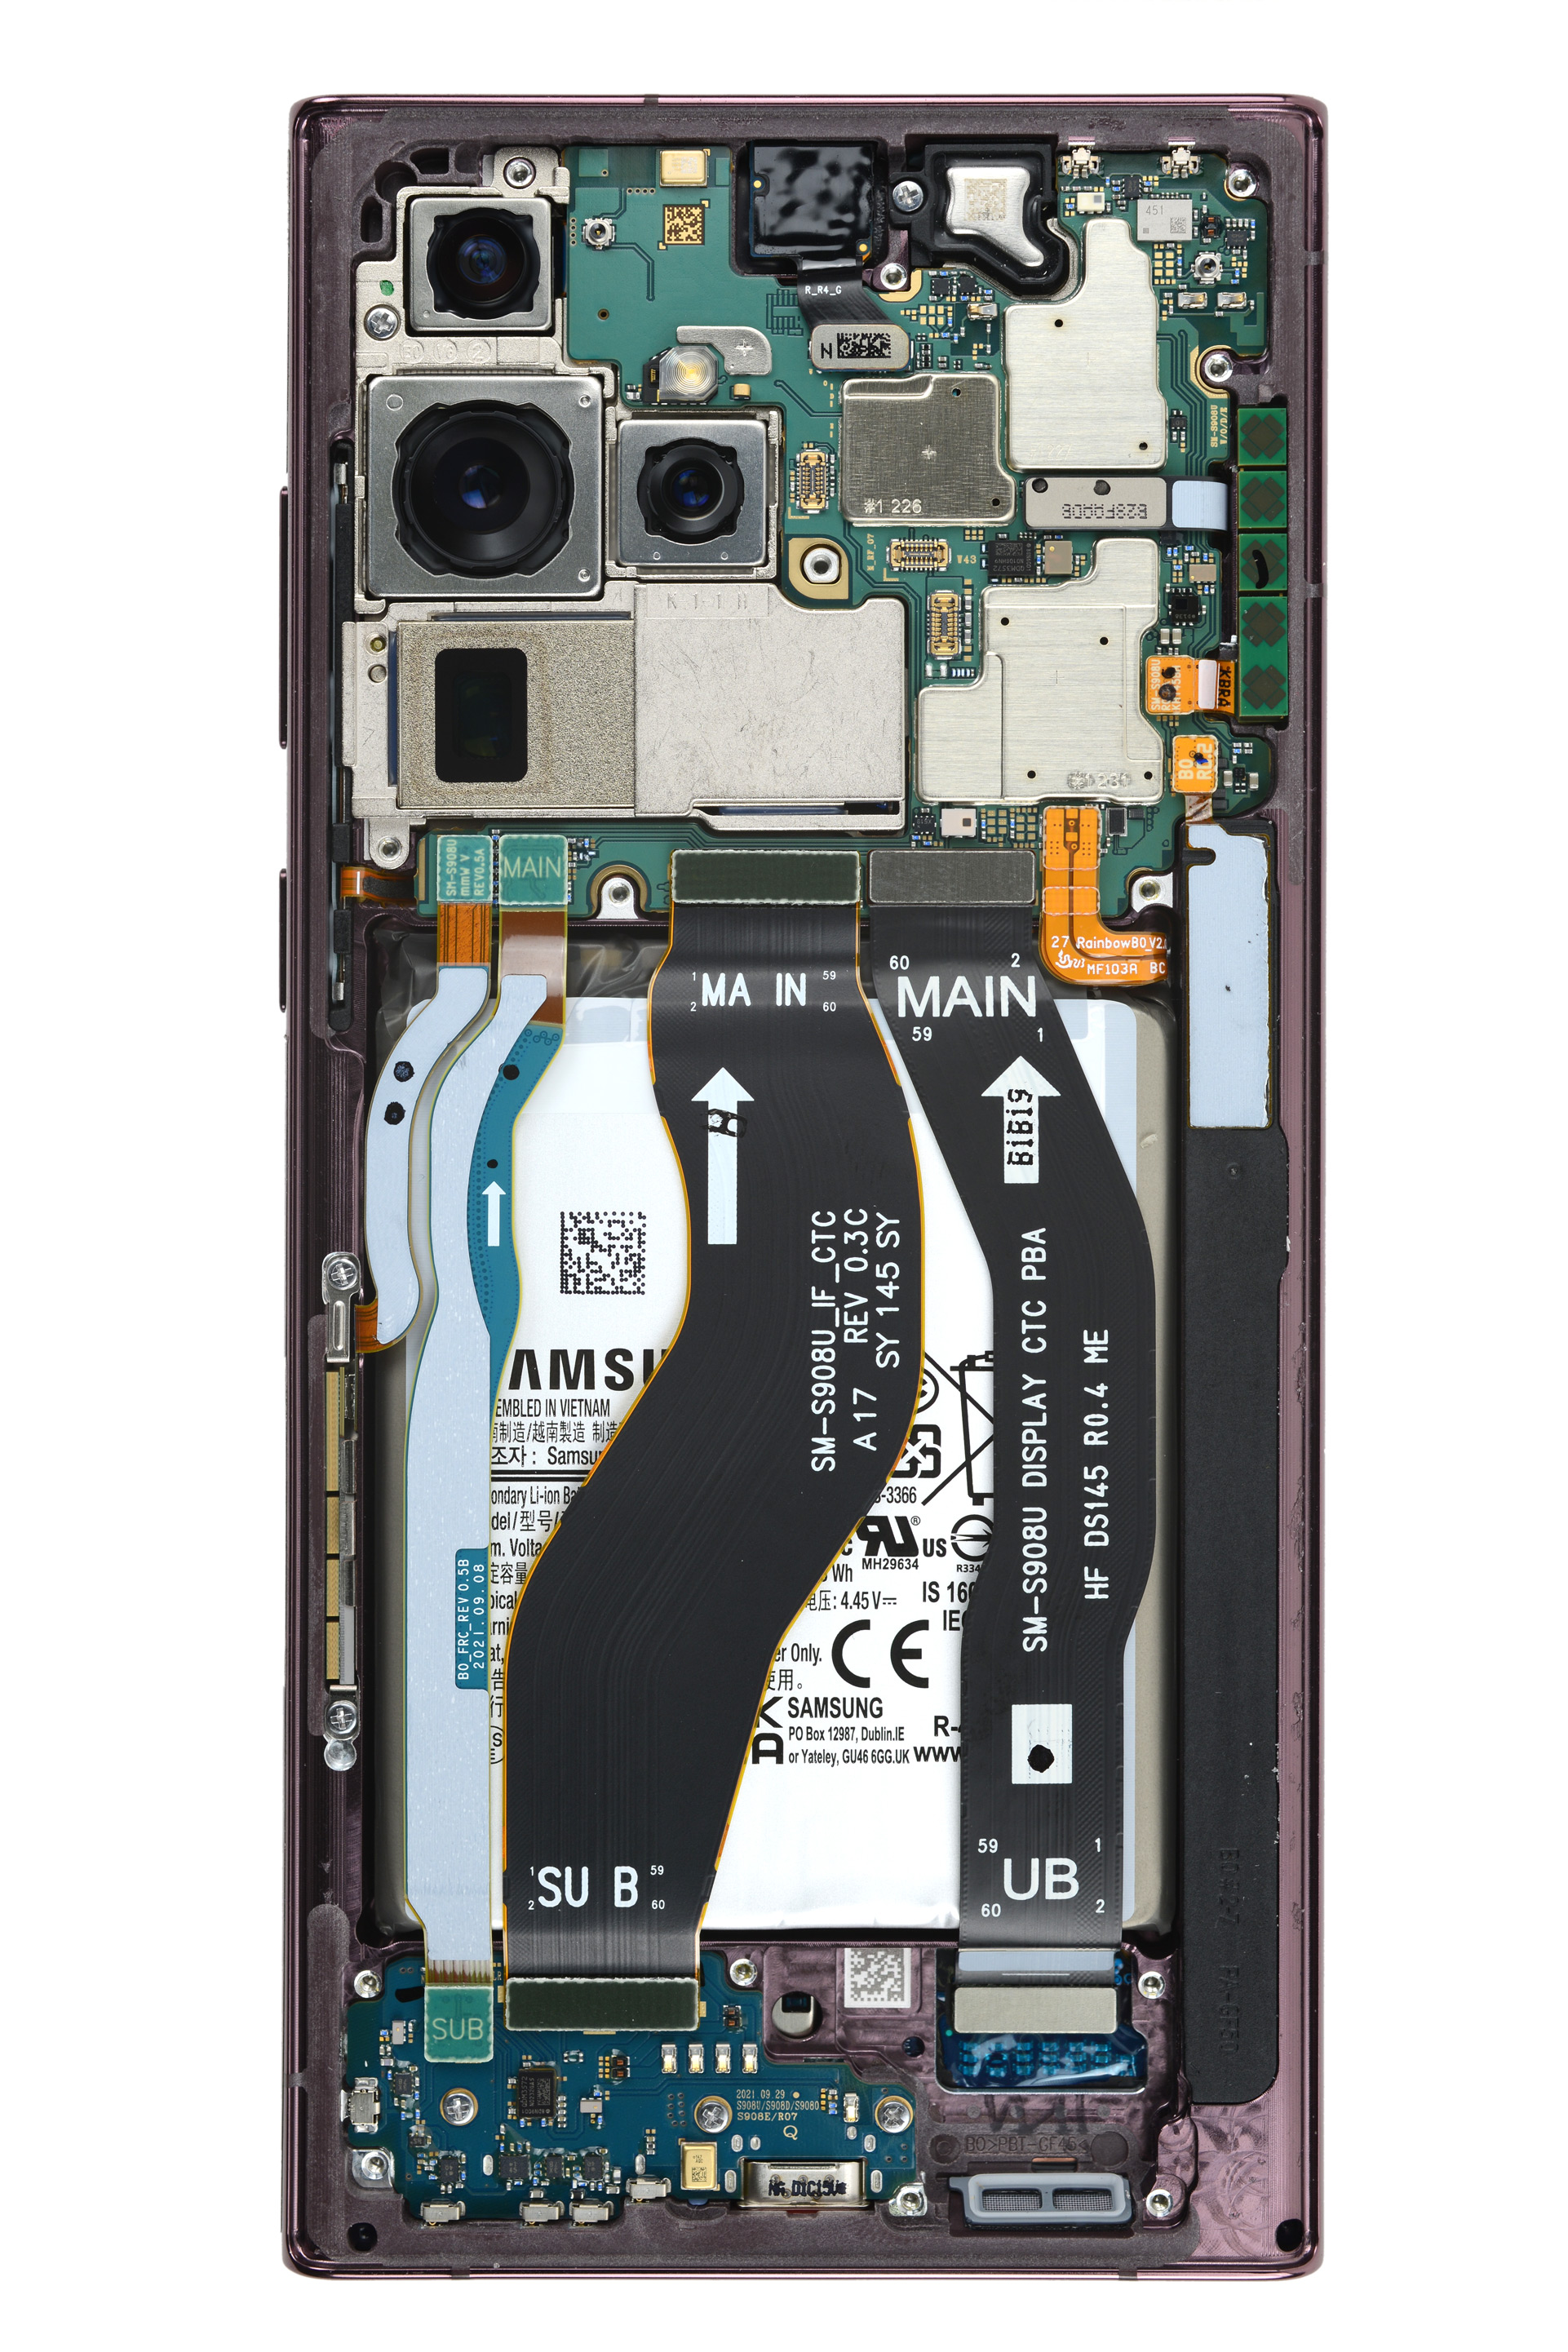 View of the Samsung Galaxy S22 Ultra with the rear cover removed, showing battery, motherboard, and interconnect cables among other components.